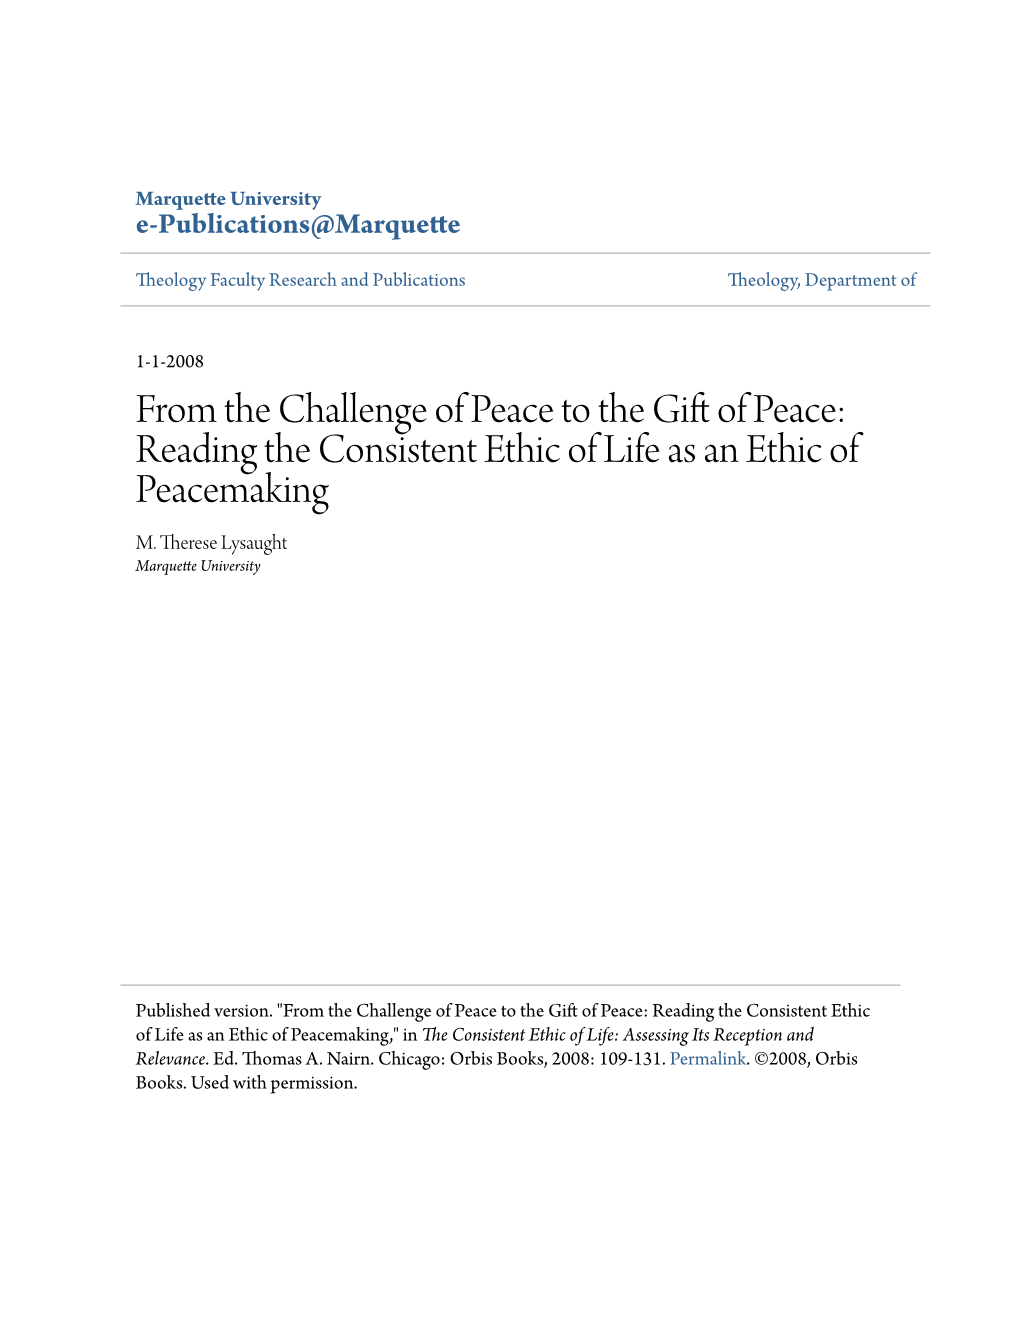 FROM the CHALLENGE of PEACE to the GIFT of PEACE Reading the Consistent Ethic of Life As an Ethic of Peacemaking